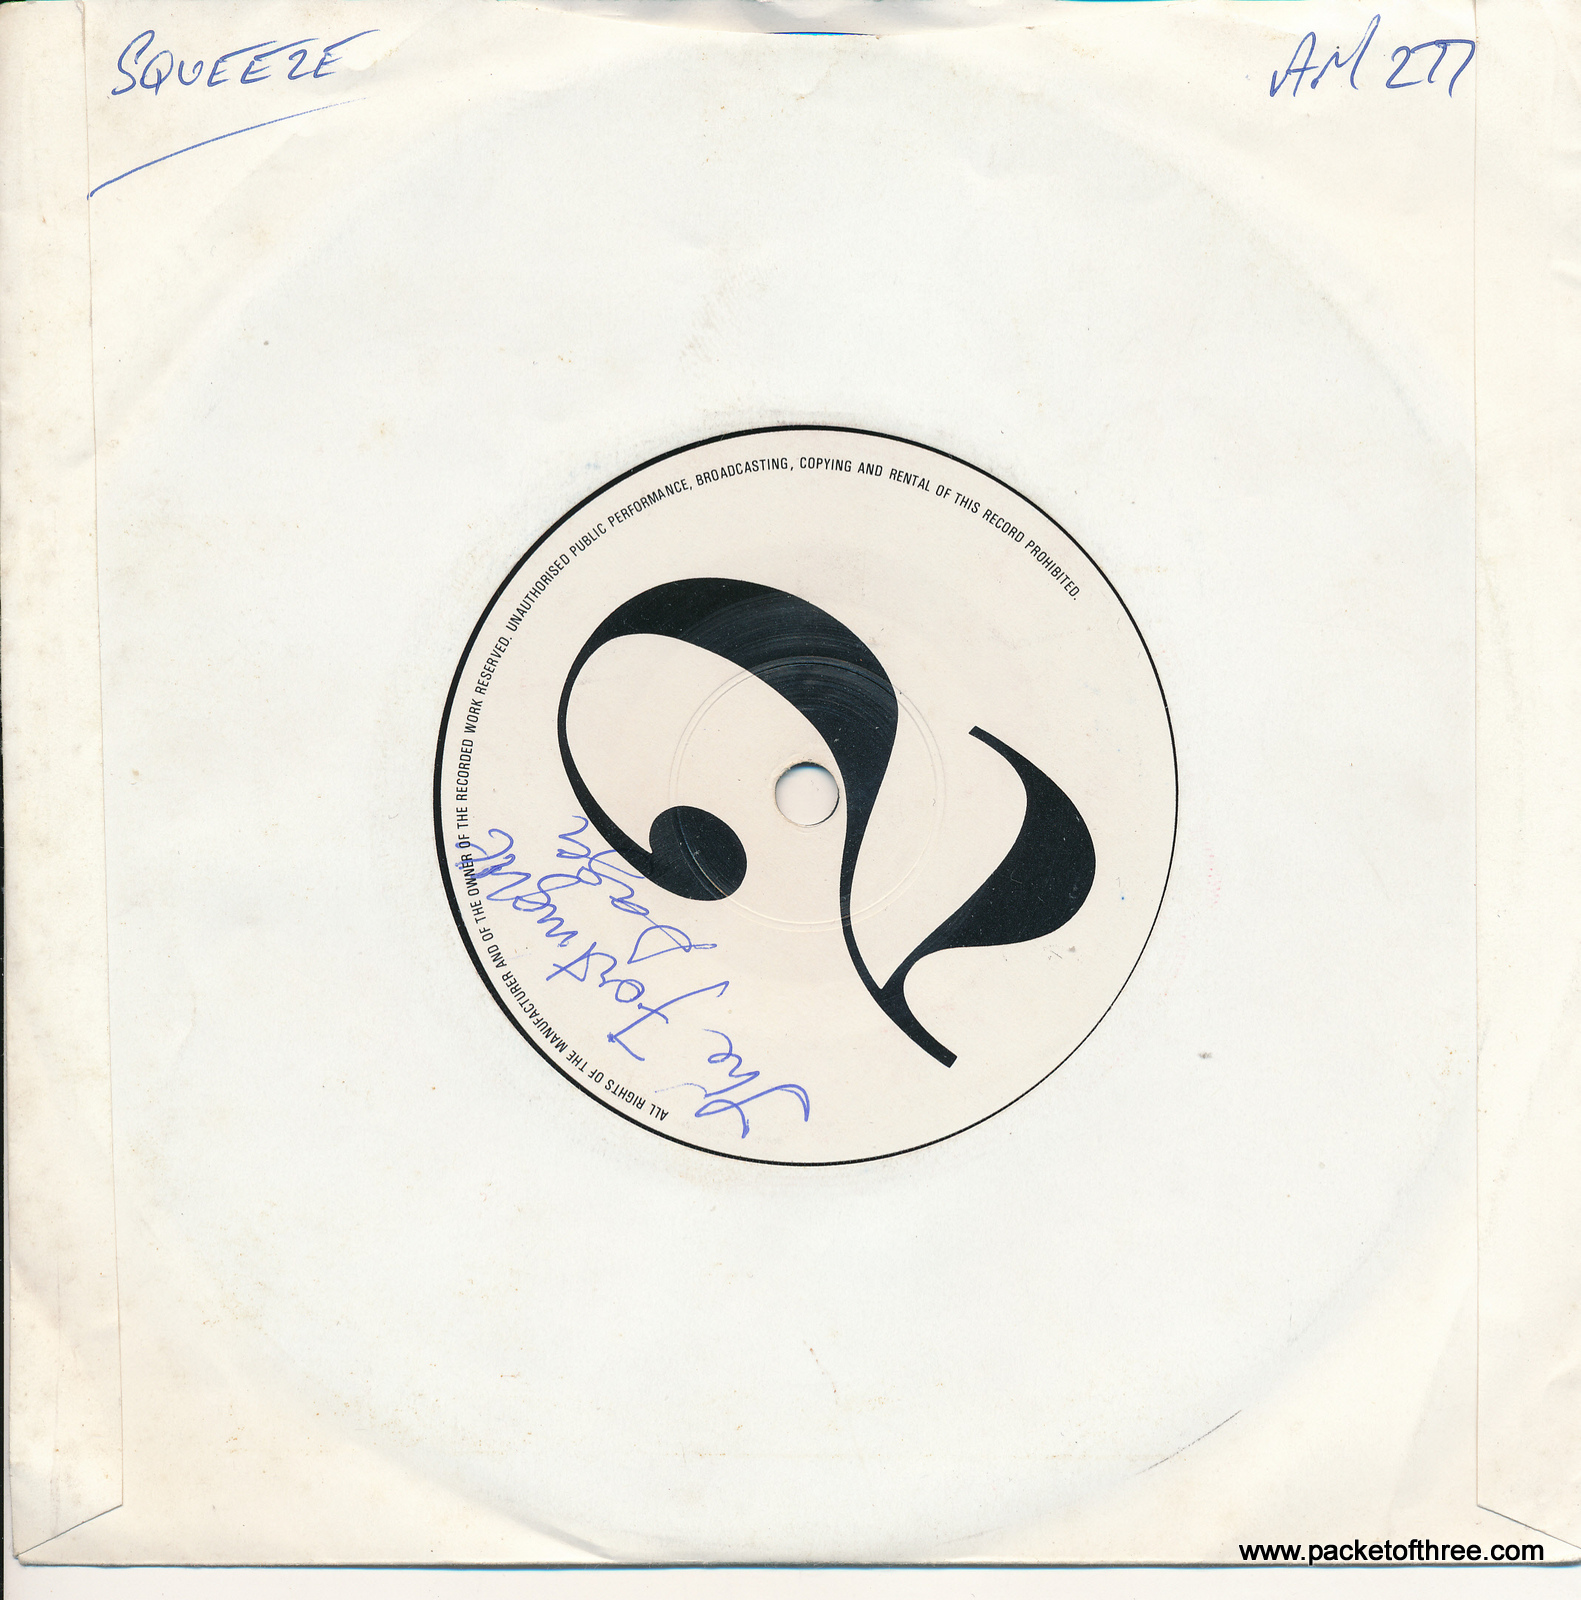 Squeeze - No Place Like Home - UK - 7" - white label demonstration copy